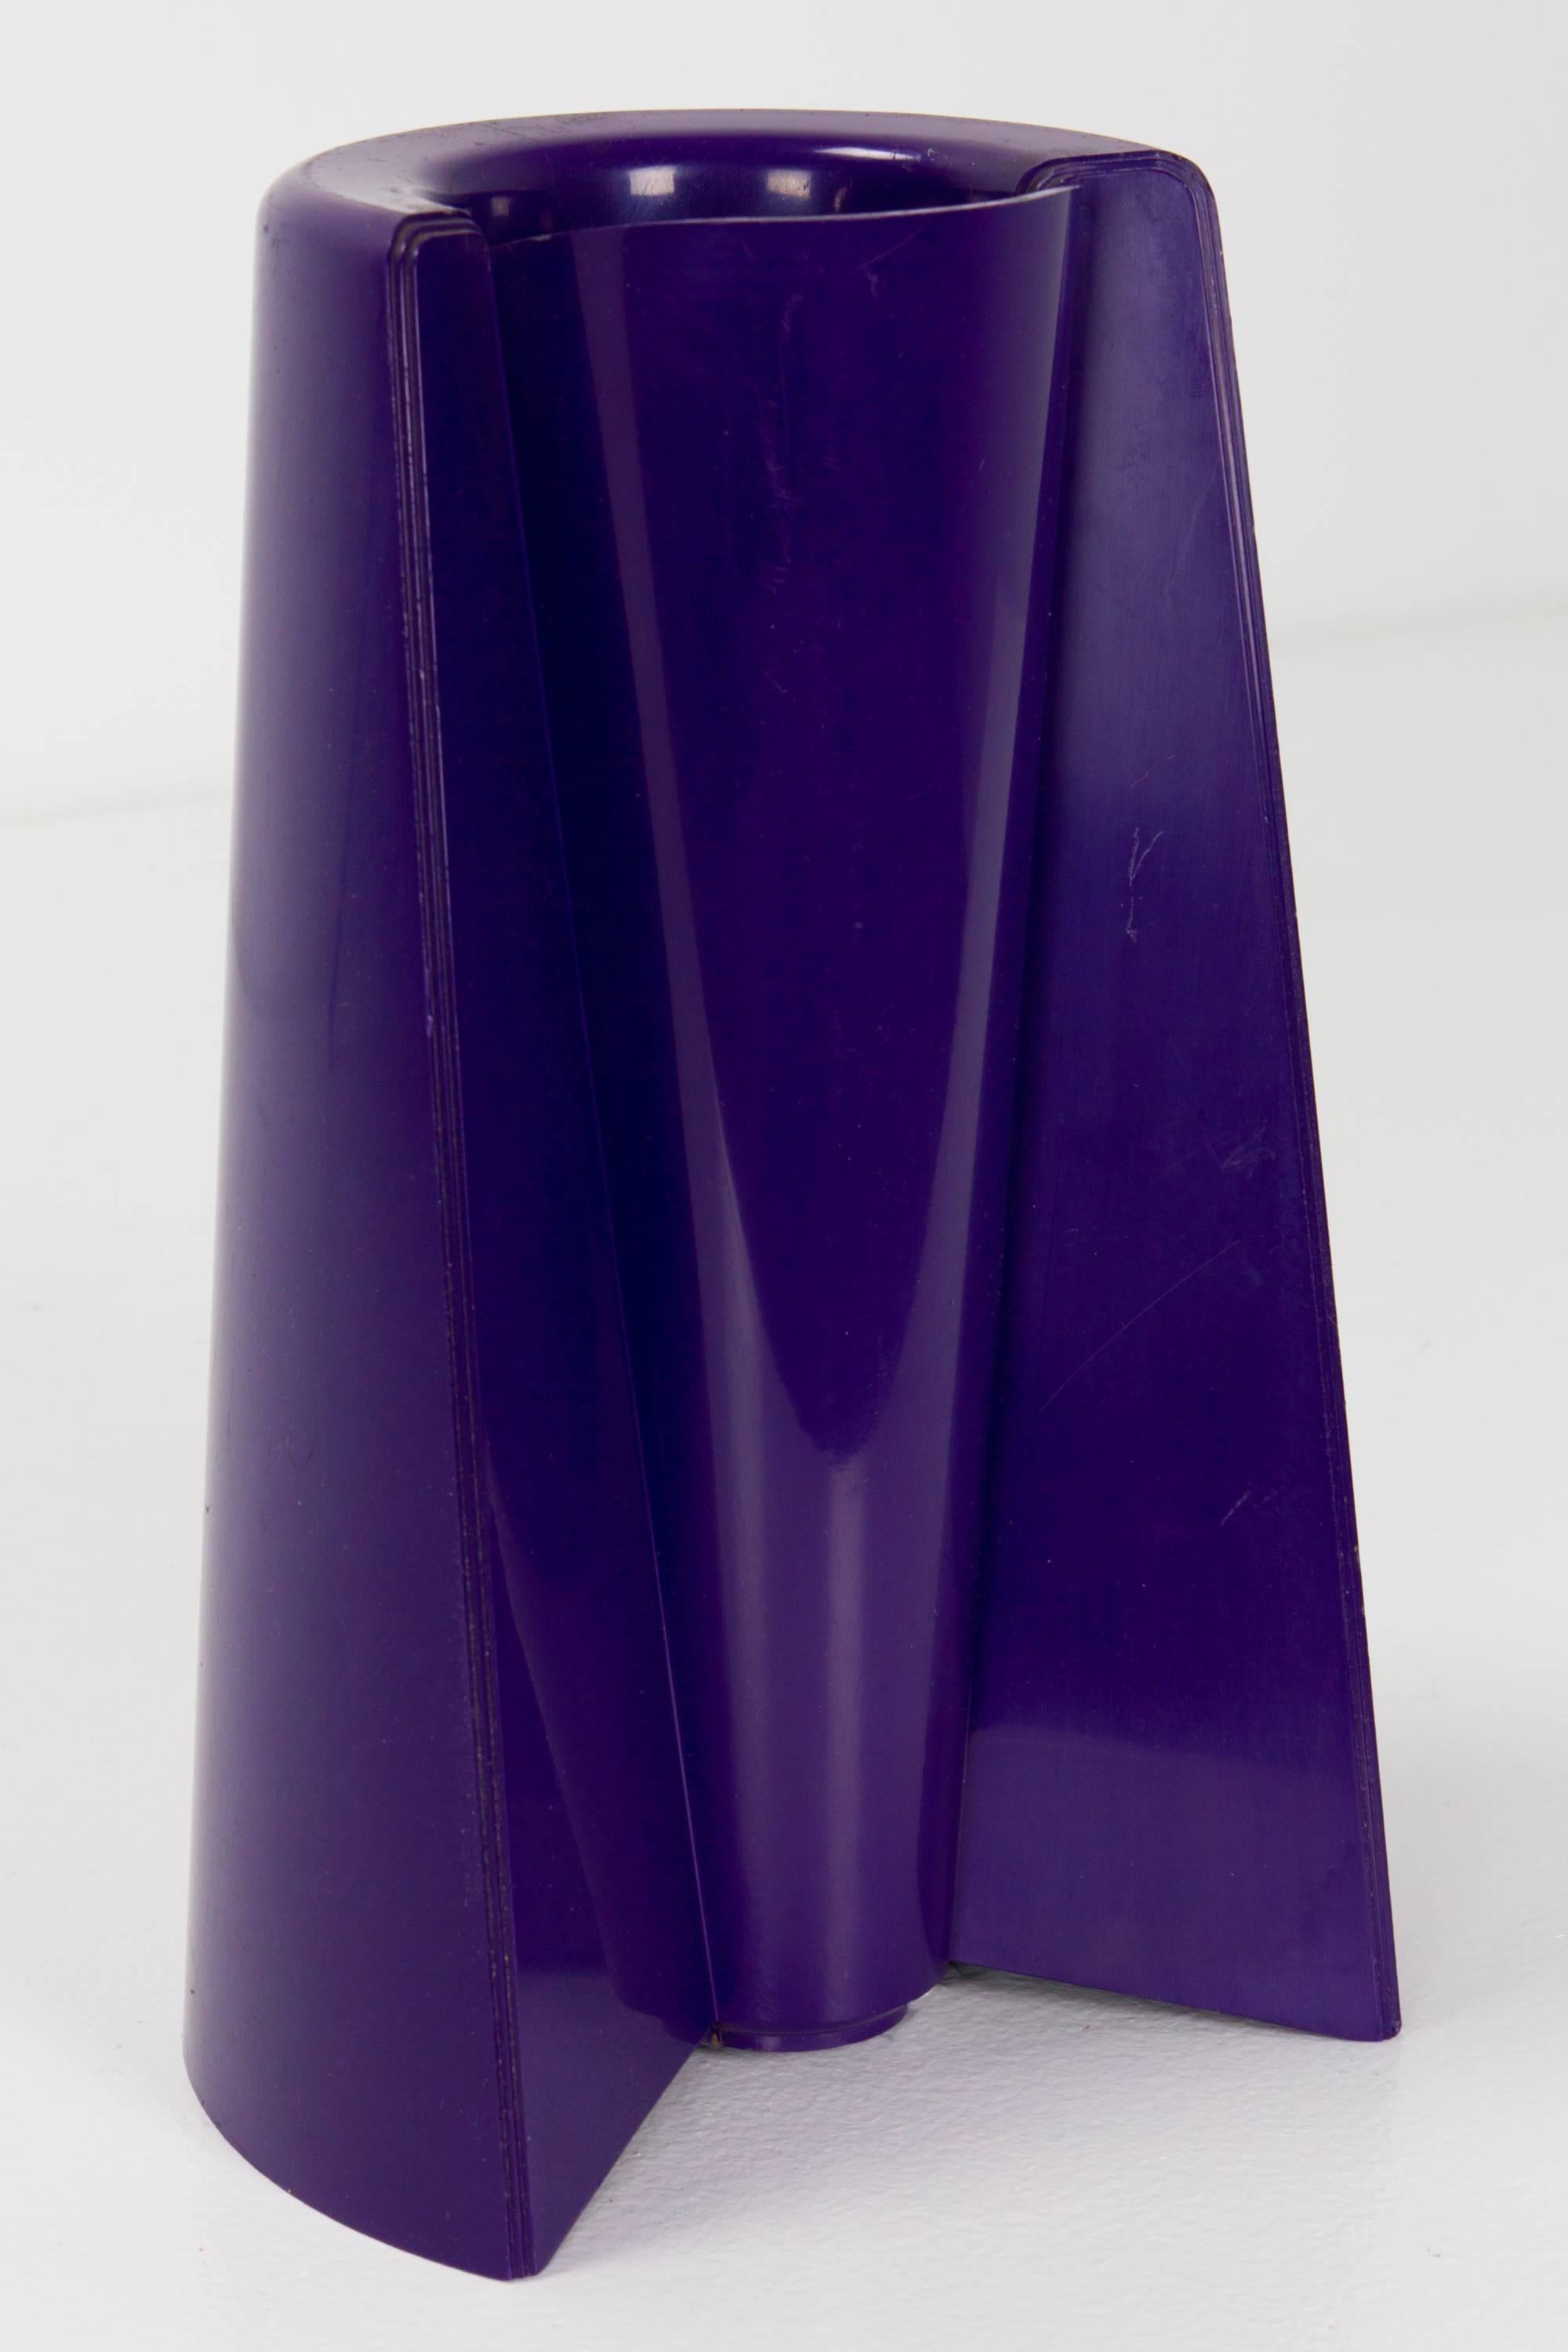 Dark purple Pago Pago vase by Enzo Mari for Danese. Can be used as pictured or upside down. Embossed maker's mark on interior.